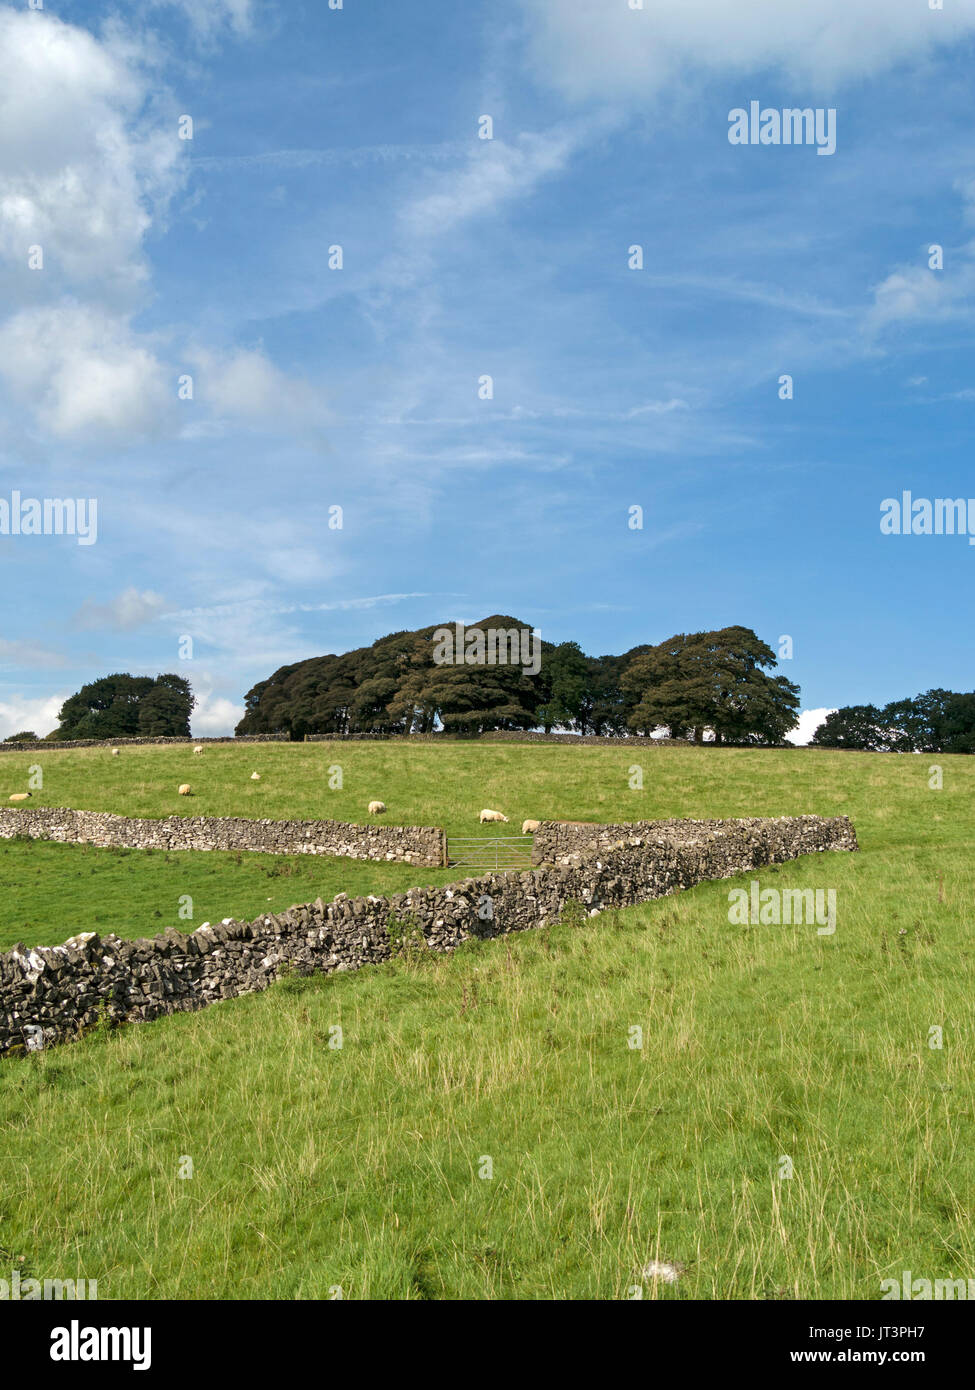 Green open fields, drystone walls and trees with blue sky above, Derbyshire Peak District, England, UK. Stock Photo